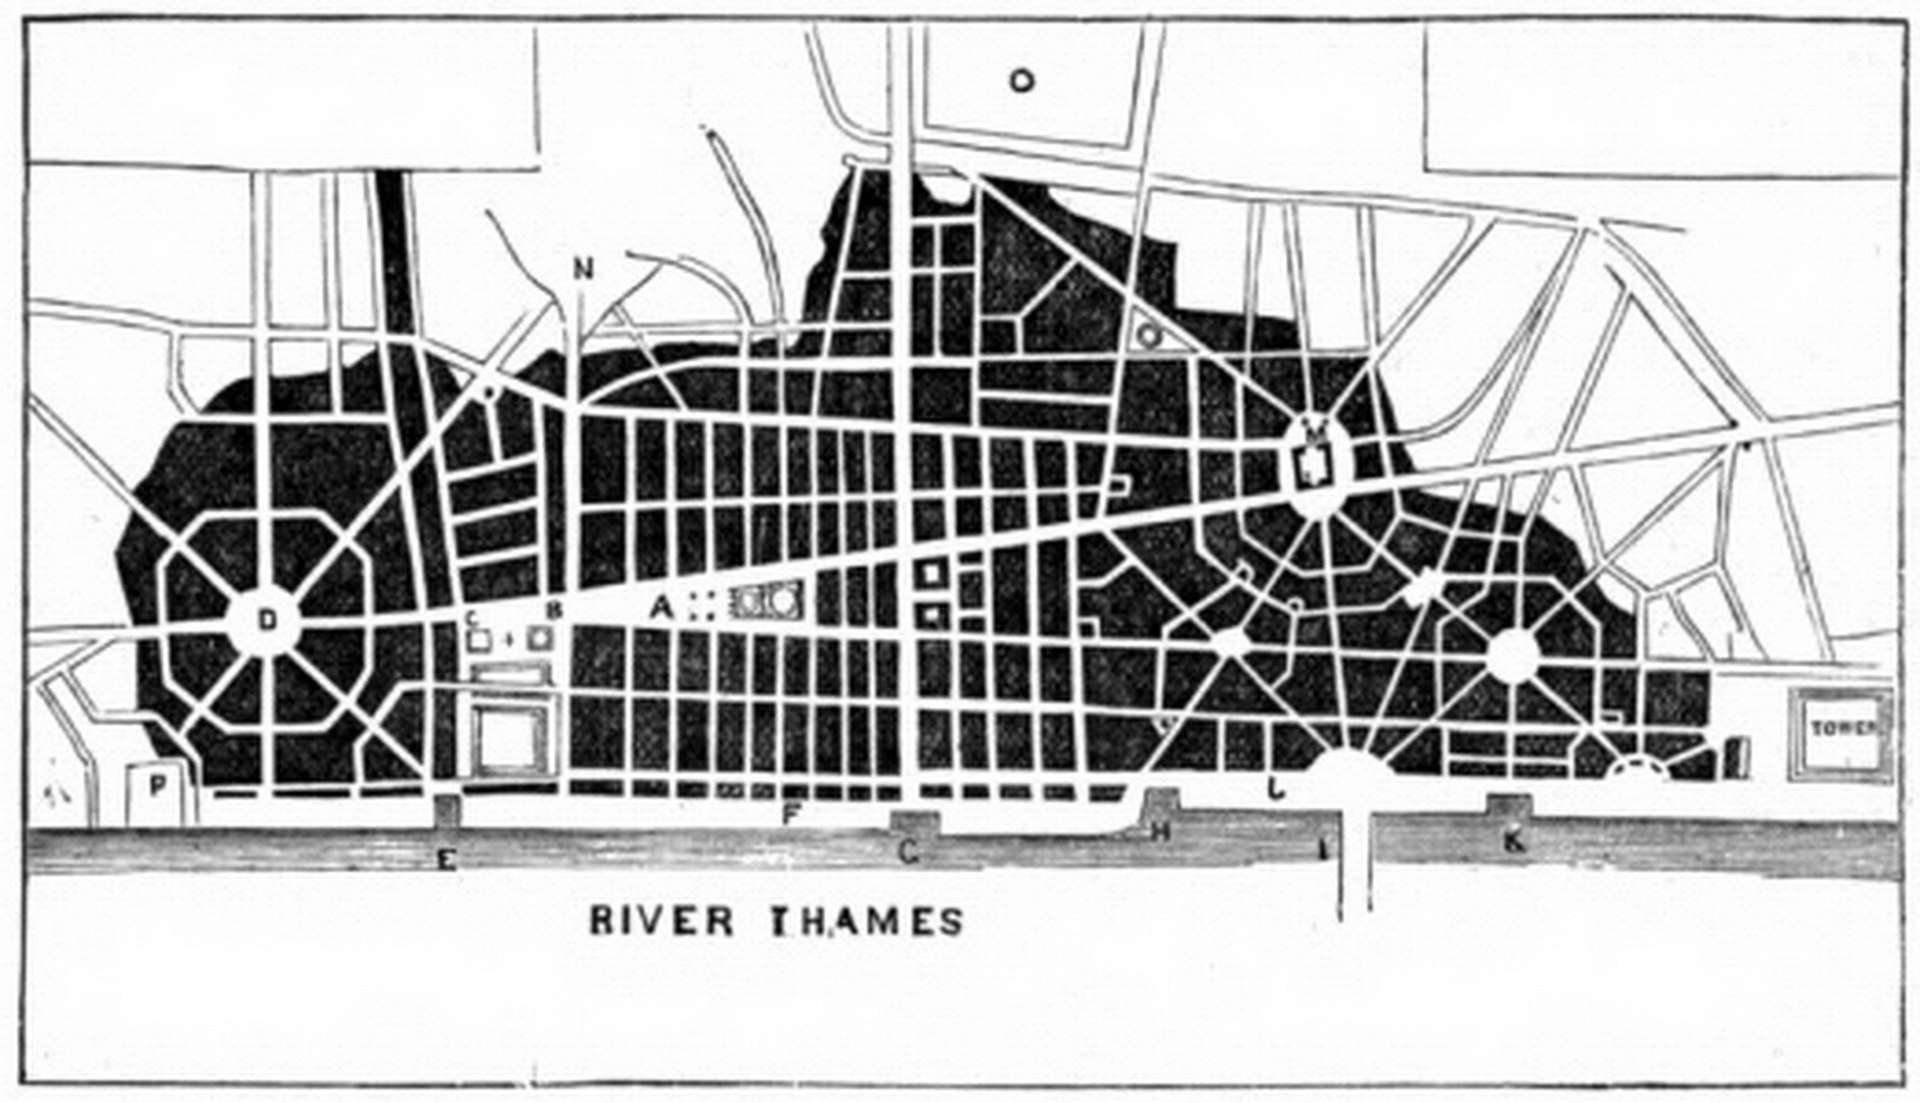 Wren's plan for rebuilding after the Great Fire of London